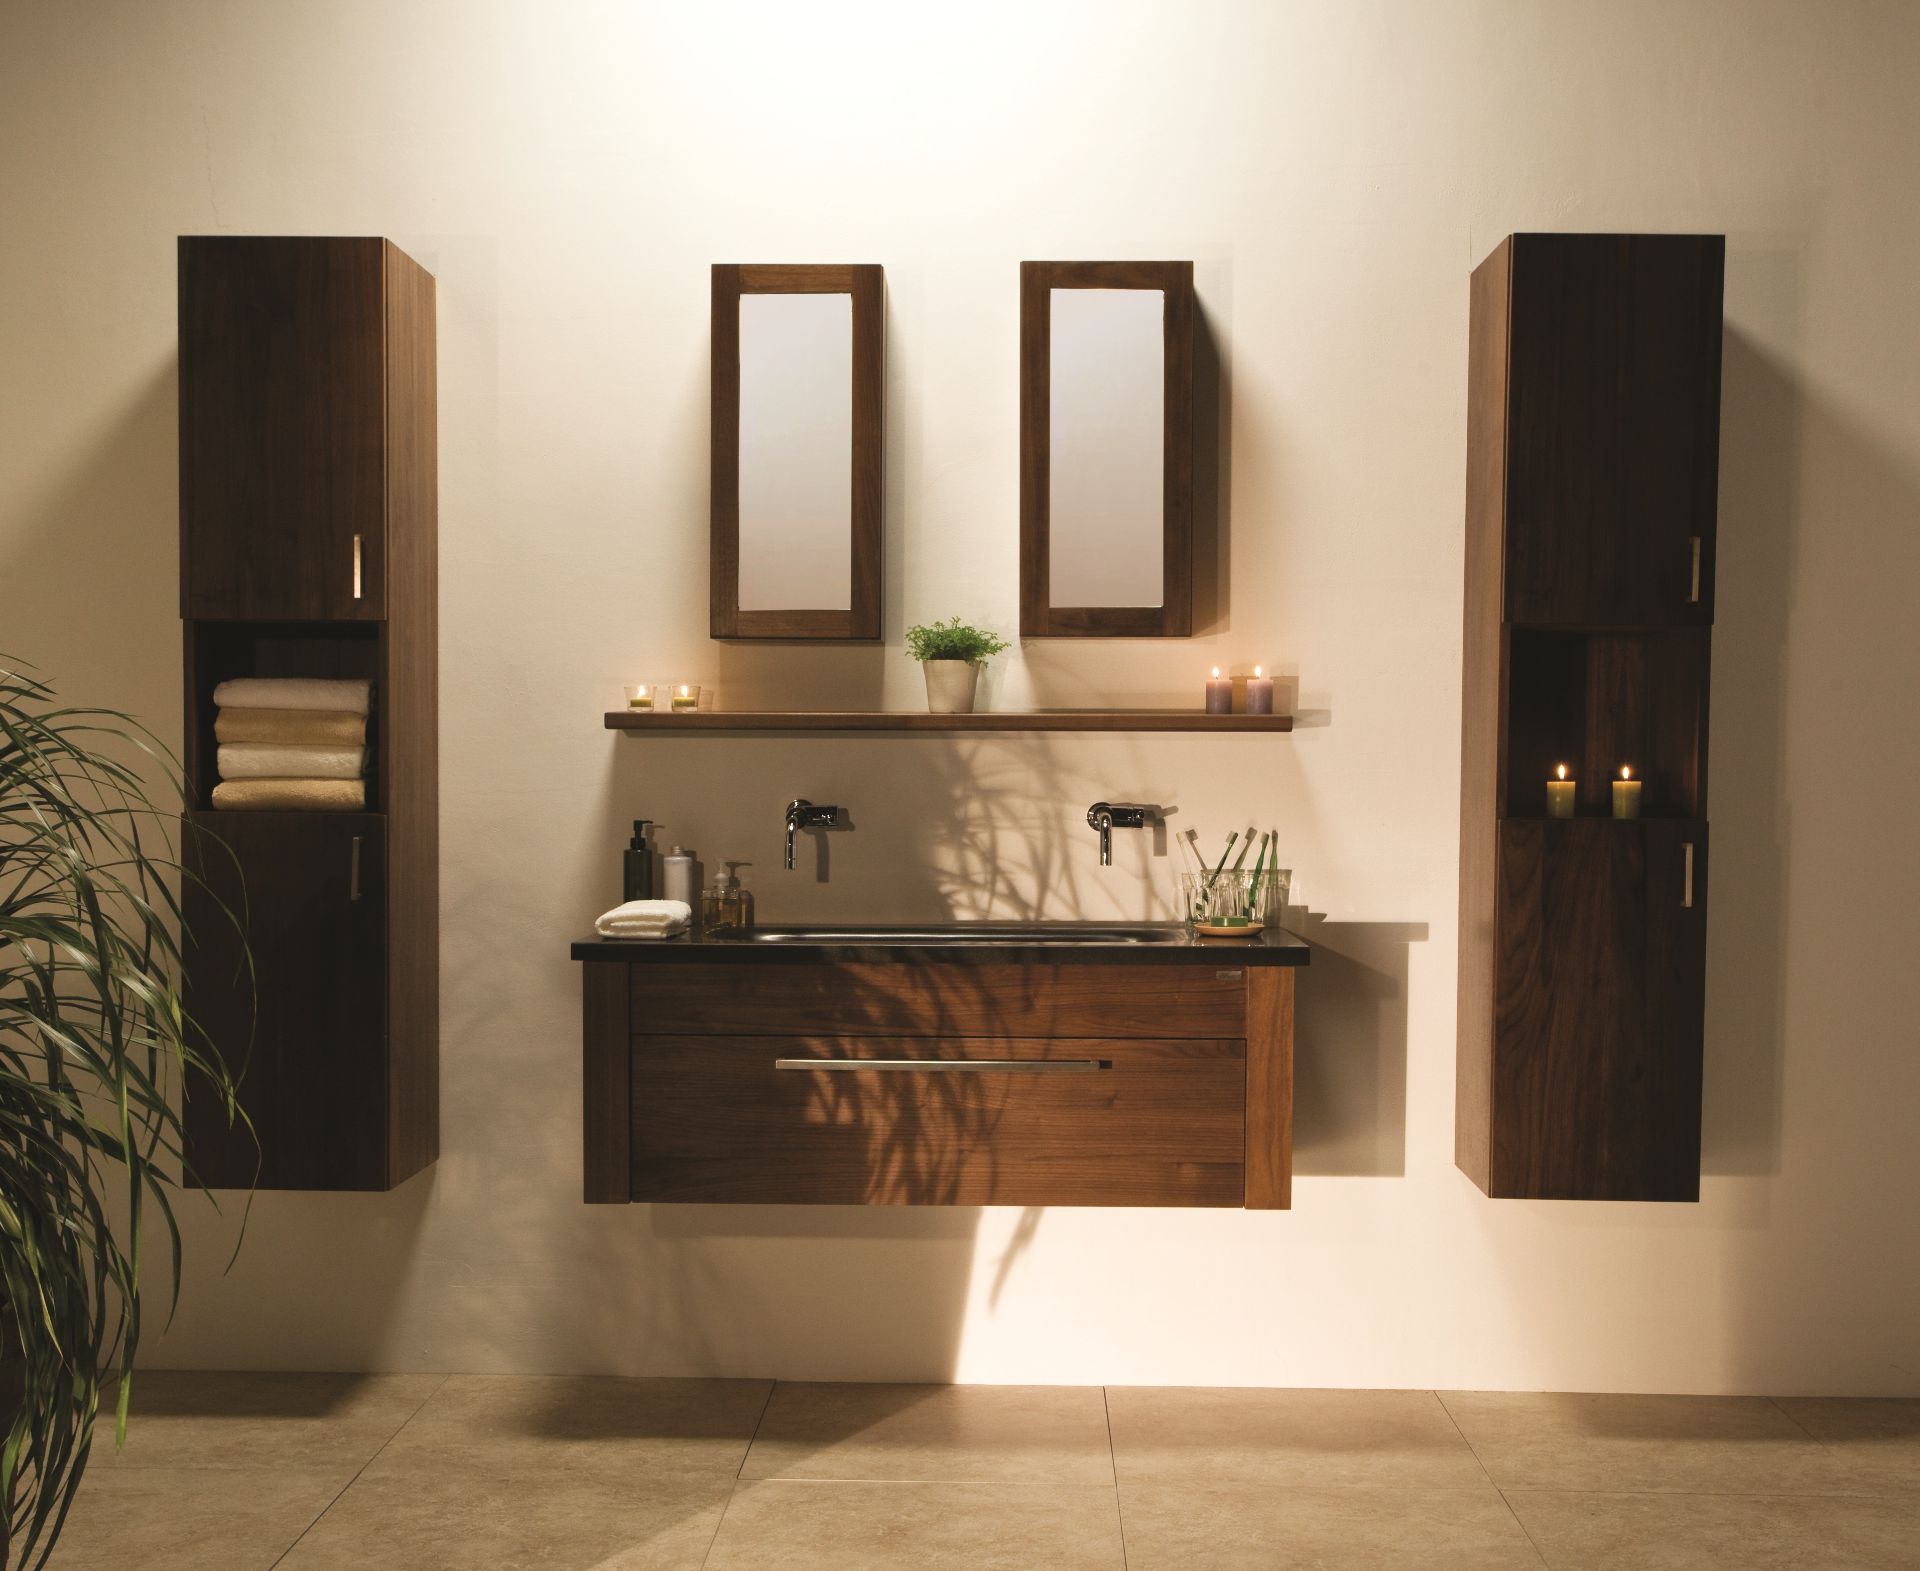 1 x Stonearth Bathroom Storage Shelf With Concealed Brackets - American Solid Walnut - Size: 750mm - Image 8 of 16